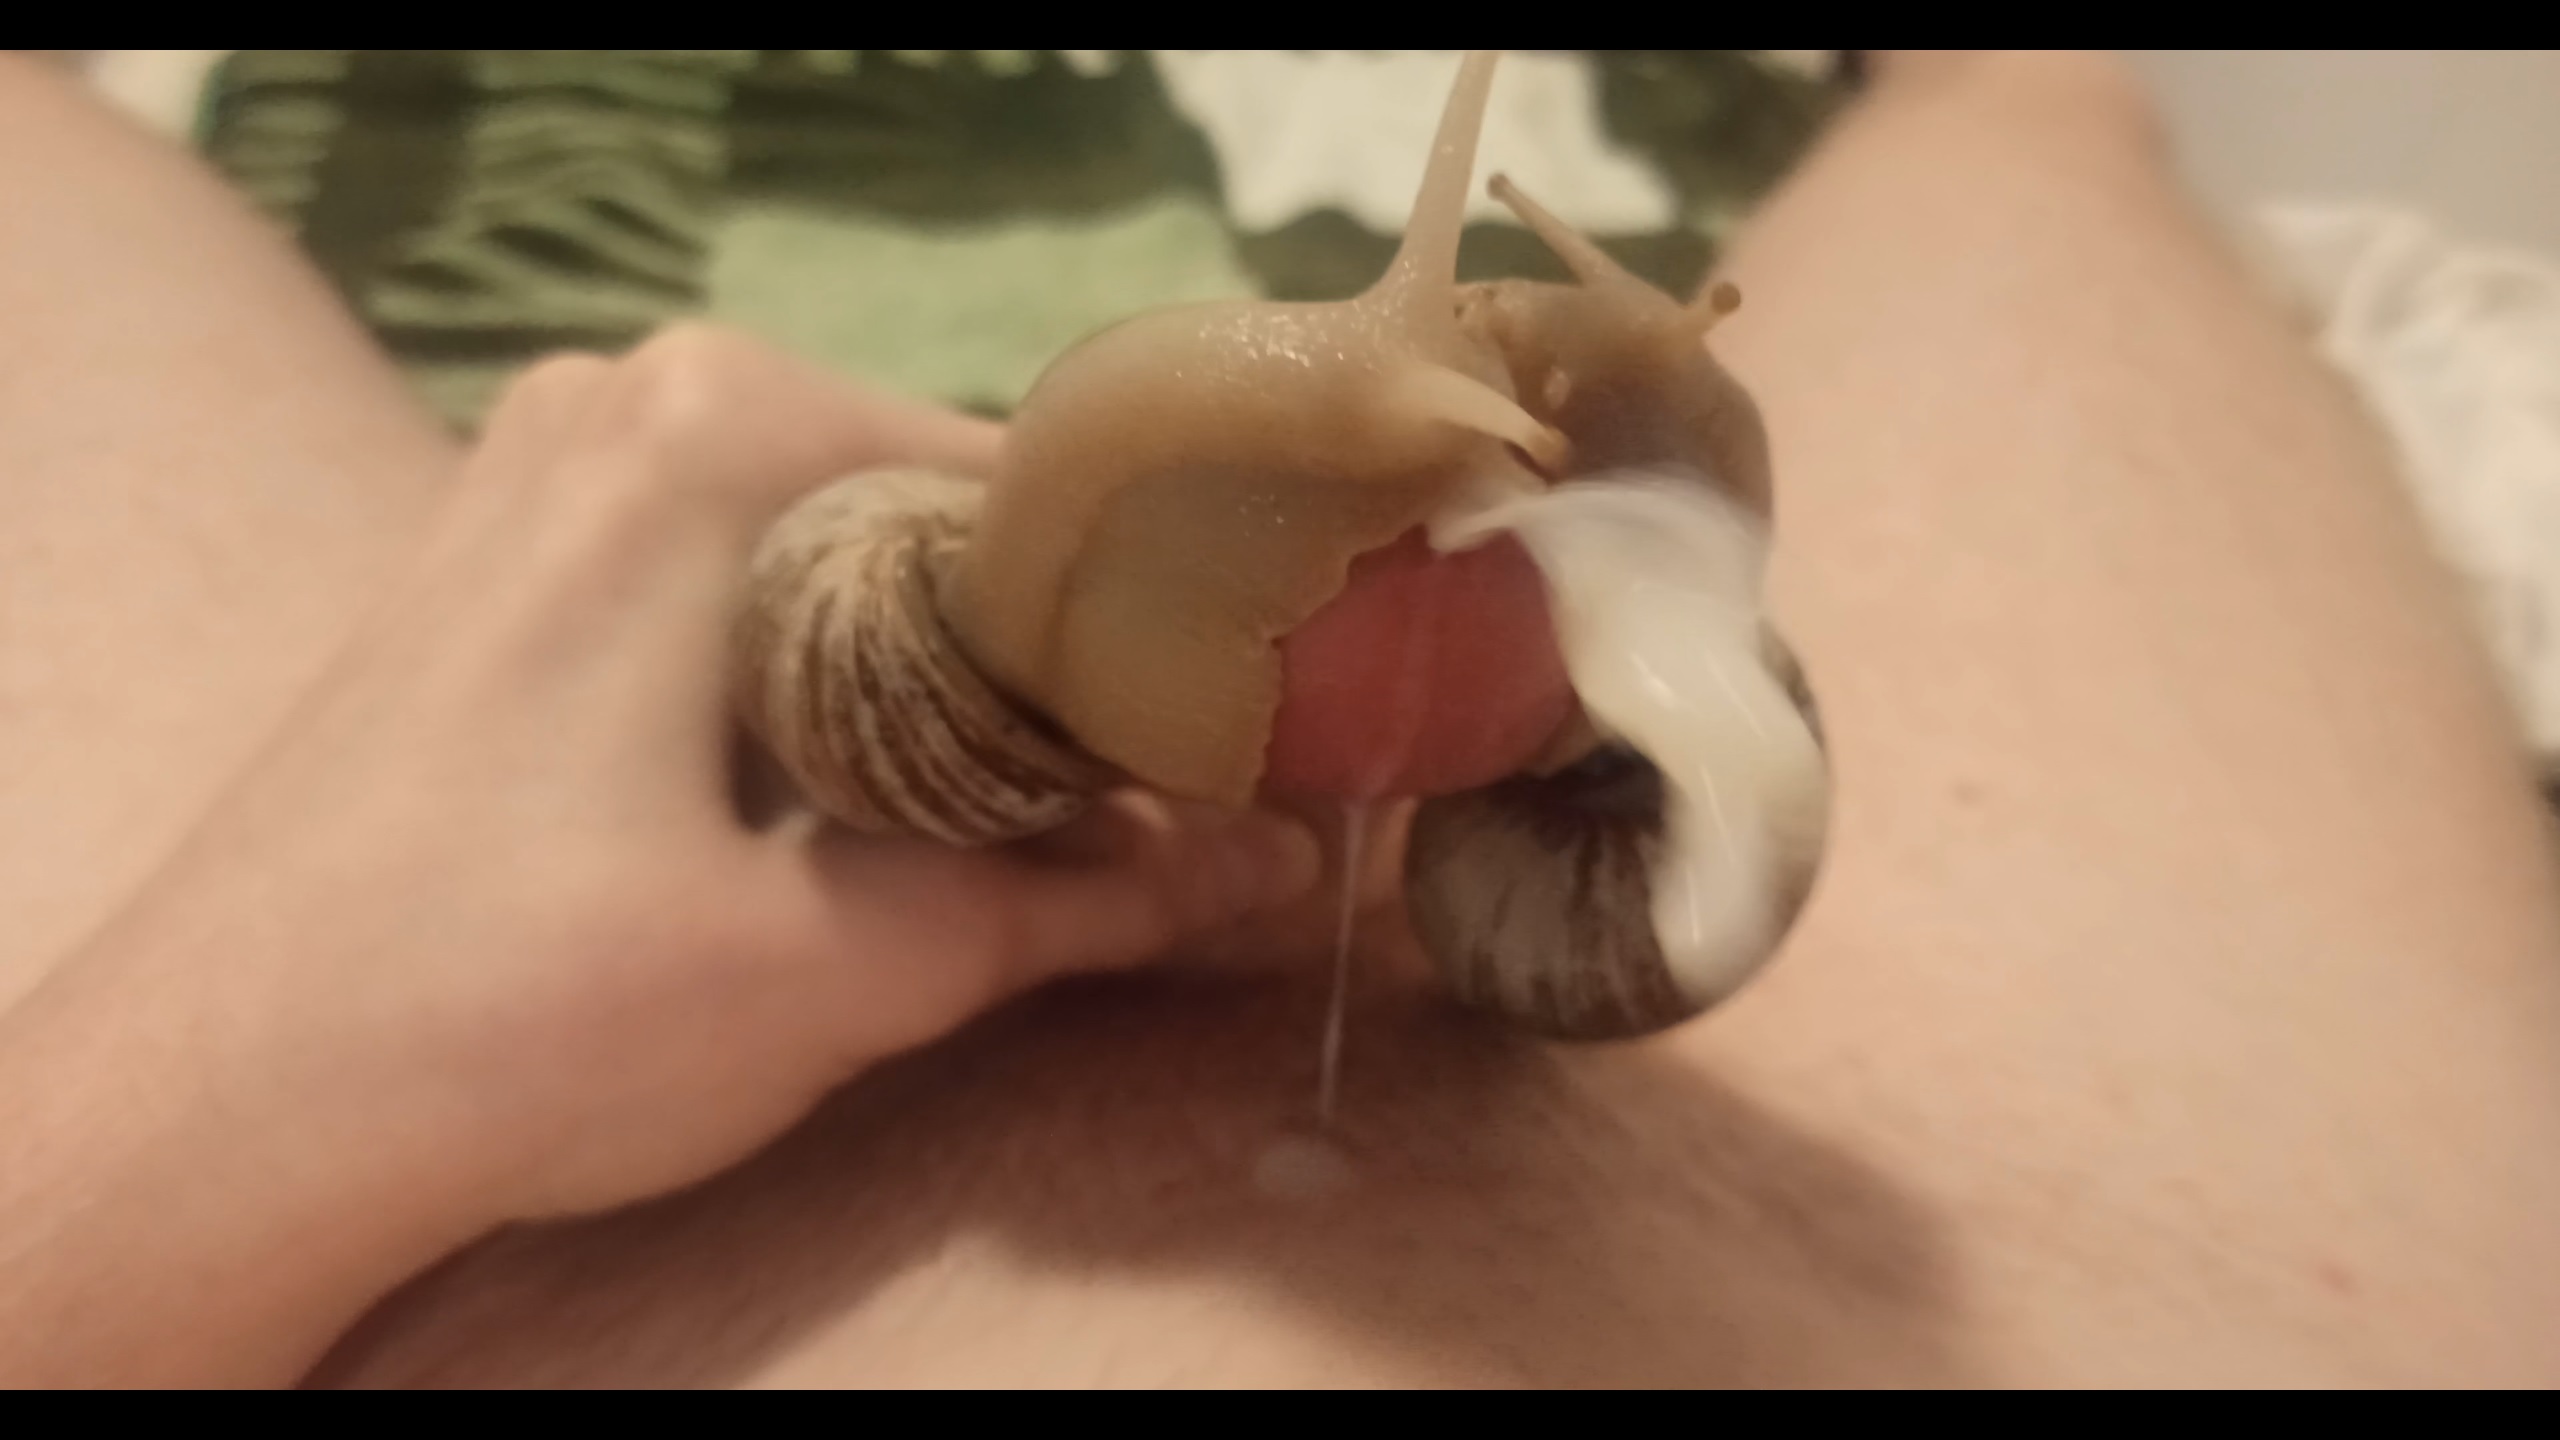 Two giant snails finish the job and make me cum